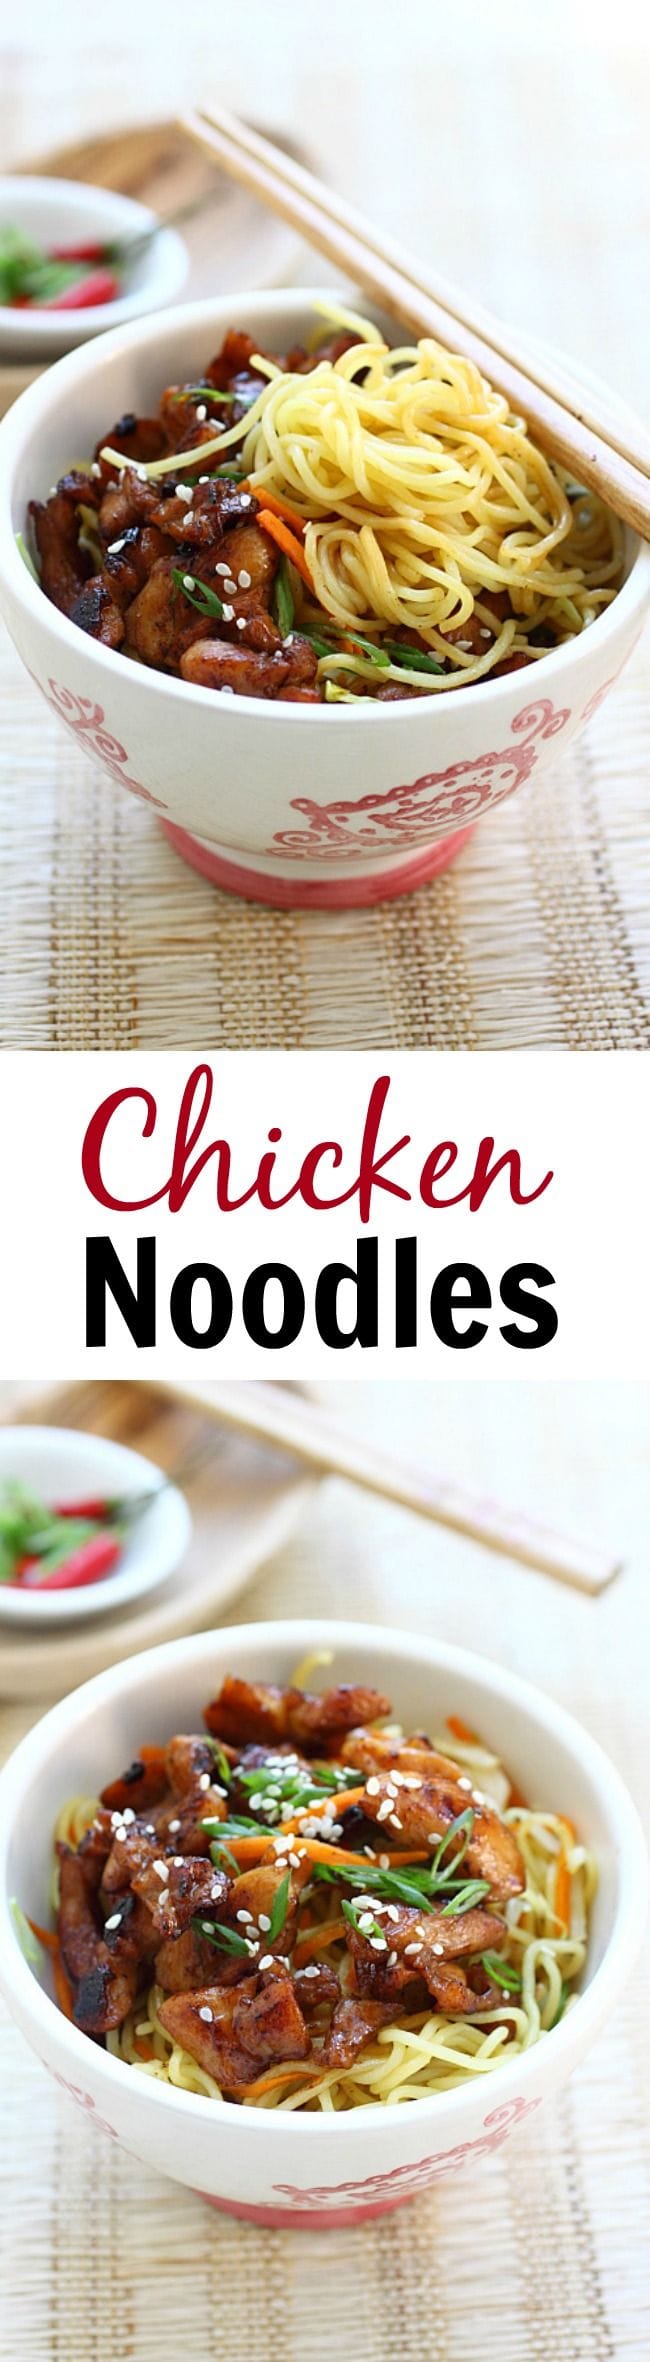 Chicken Noodles – Stir-fried chicken noodles with chicken and egg noodles. This easy chicken noodles recipe is delicious, easy to make, and perfect for weeknight dinner | rasamalaysia.com